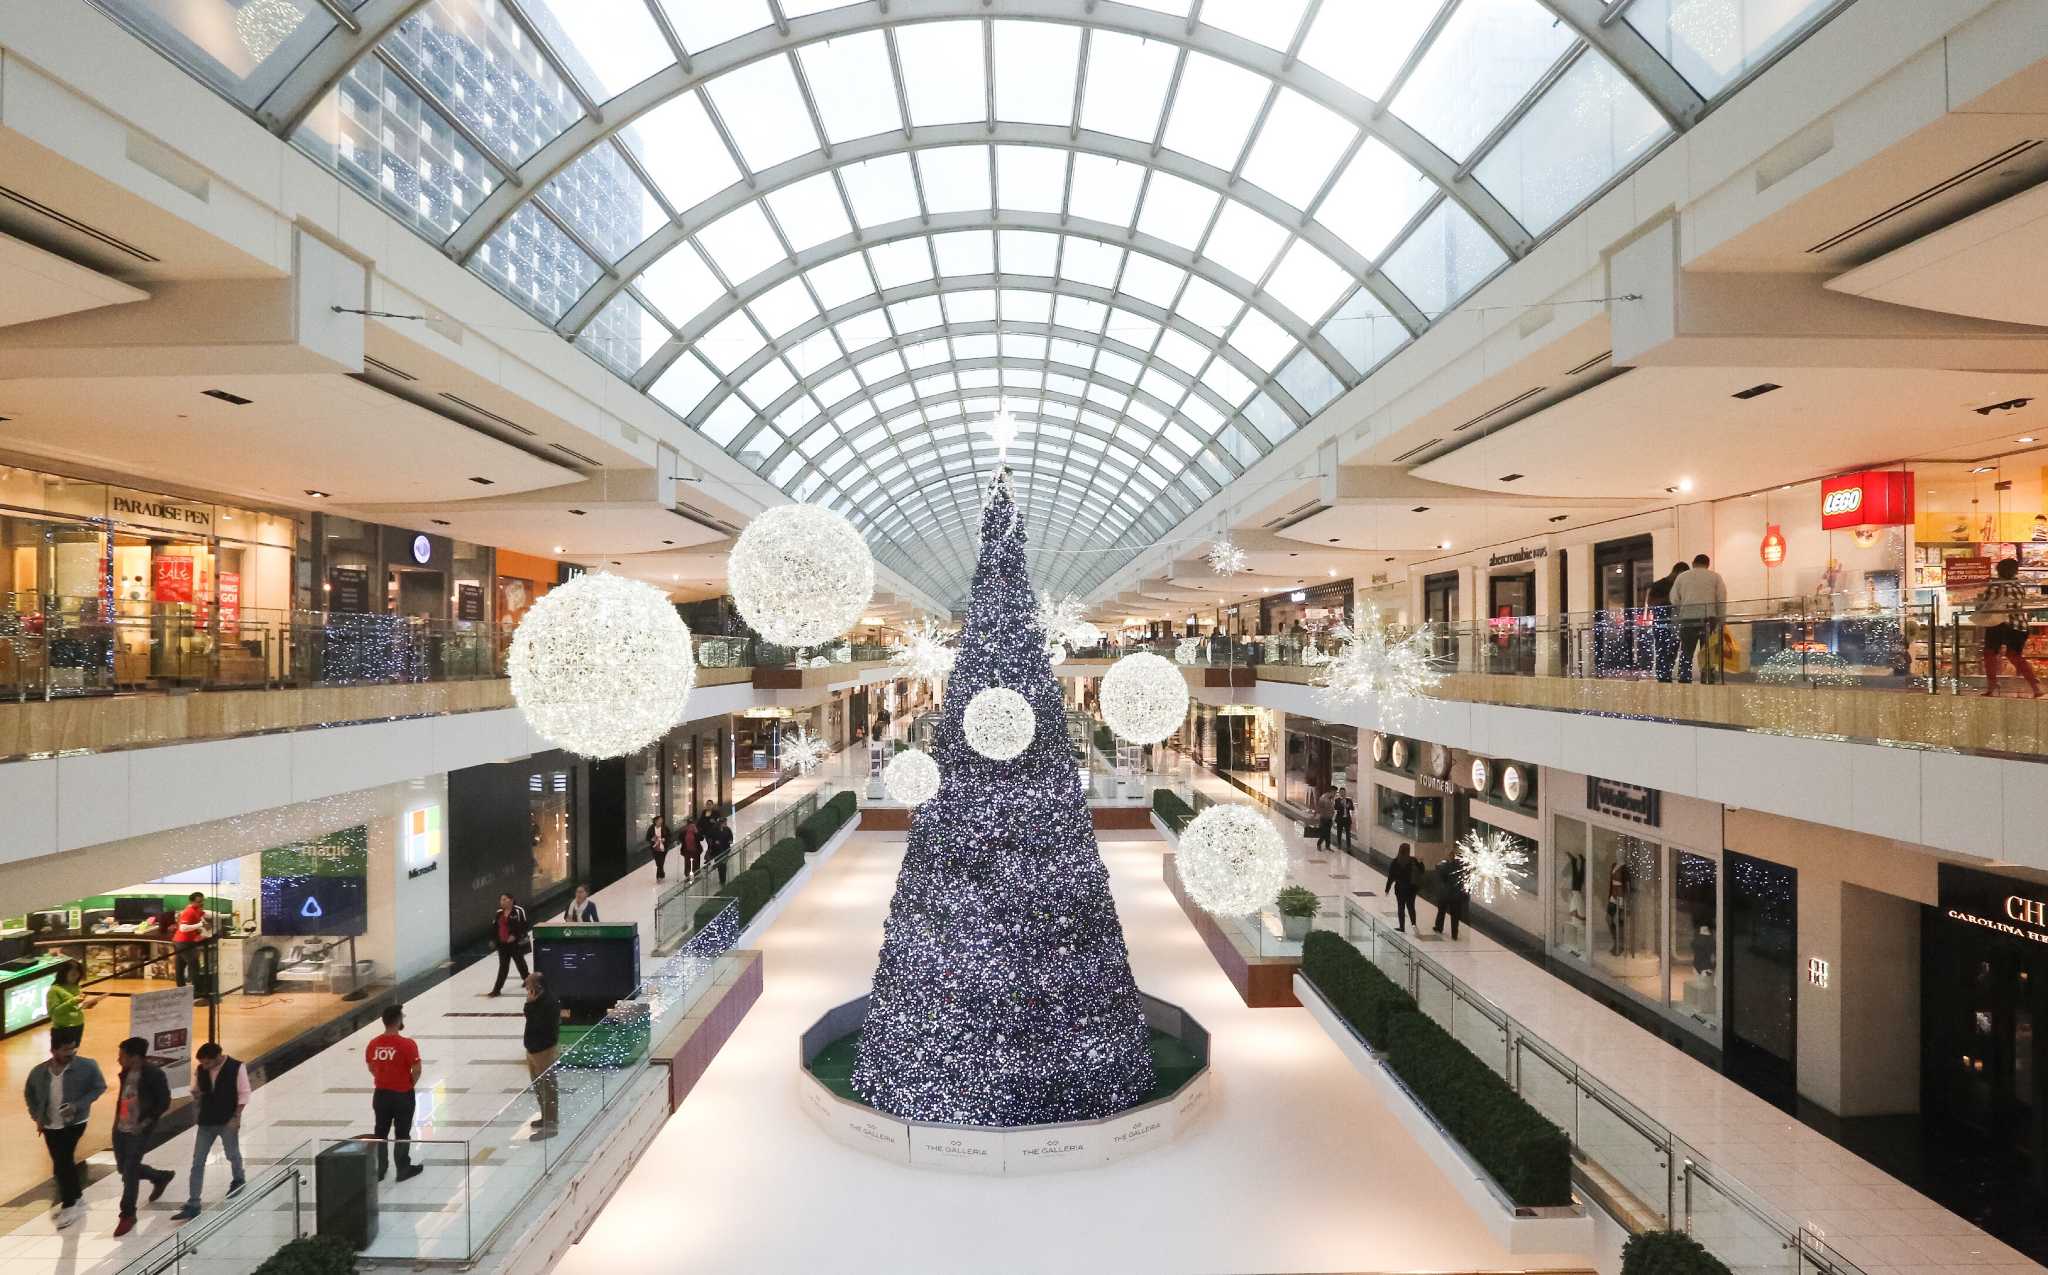 The Galleria mall announces 5 new retailers